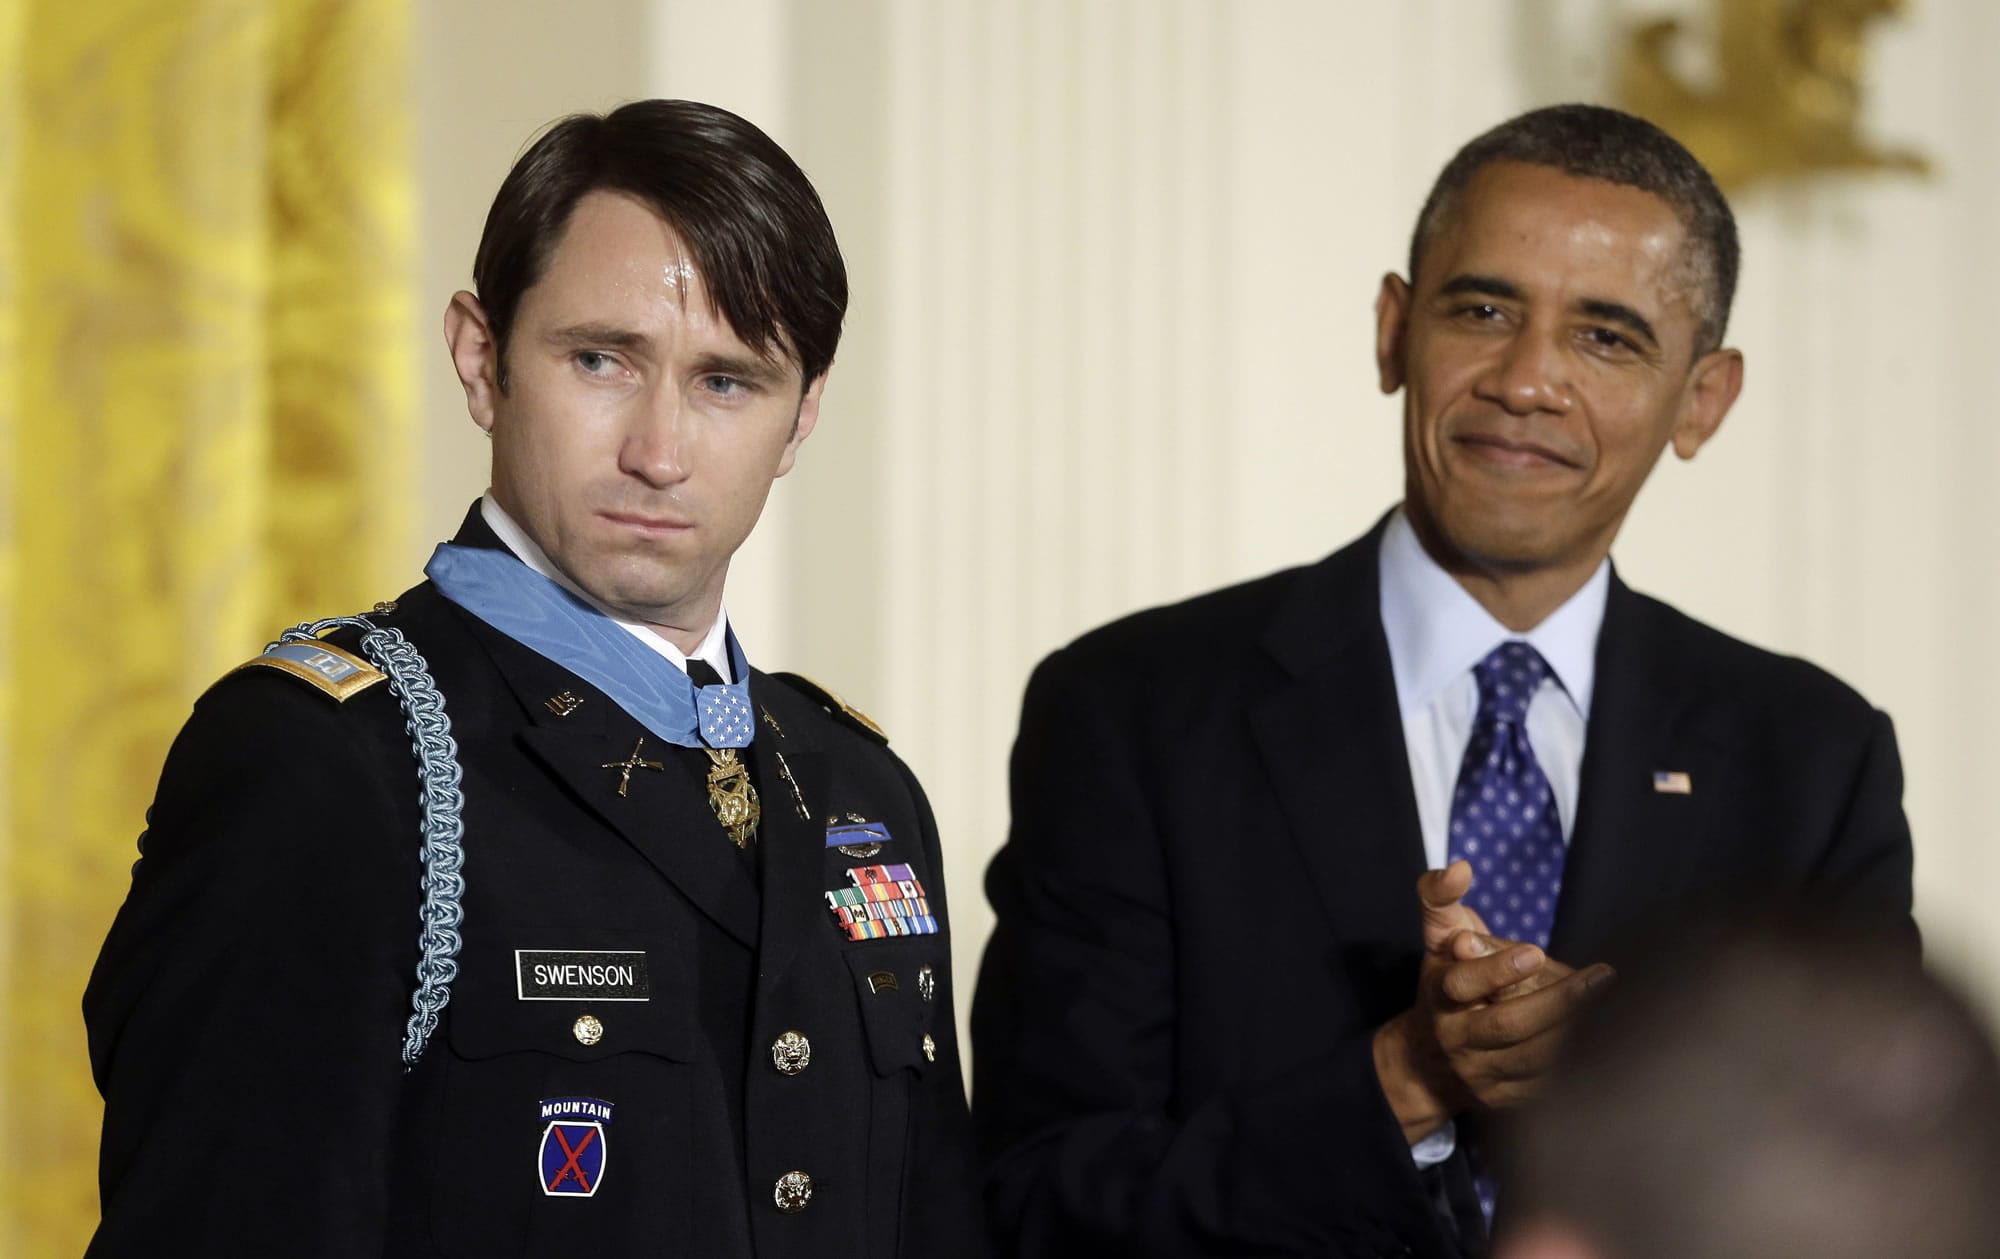 President Barack Obama, right, applauds after awarding the Medal of Honor to former Army Capt. William D.